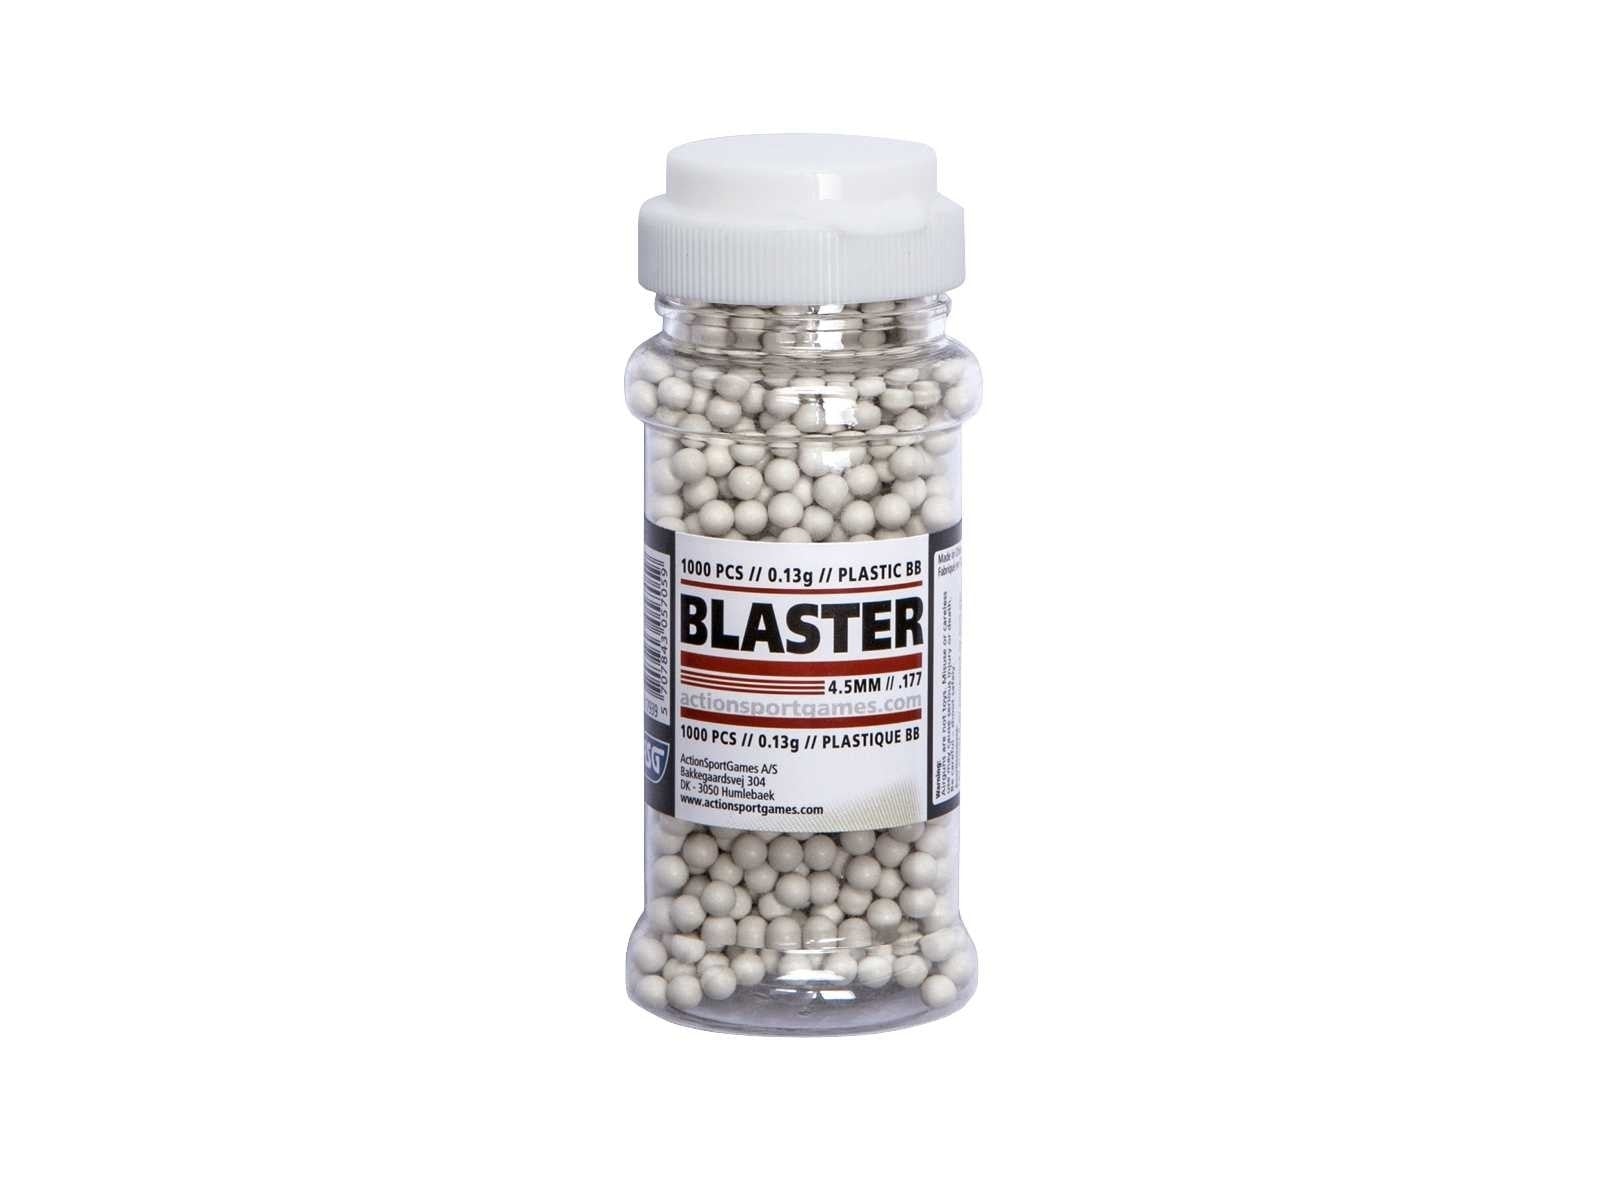 ASG 4.5MM BLASTER PLASTIC BB'S - 1000'S - NeonSales South Africa